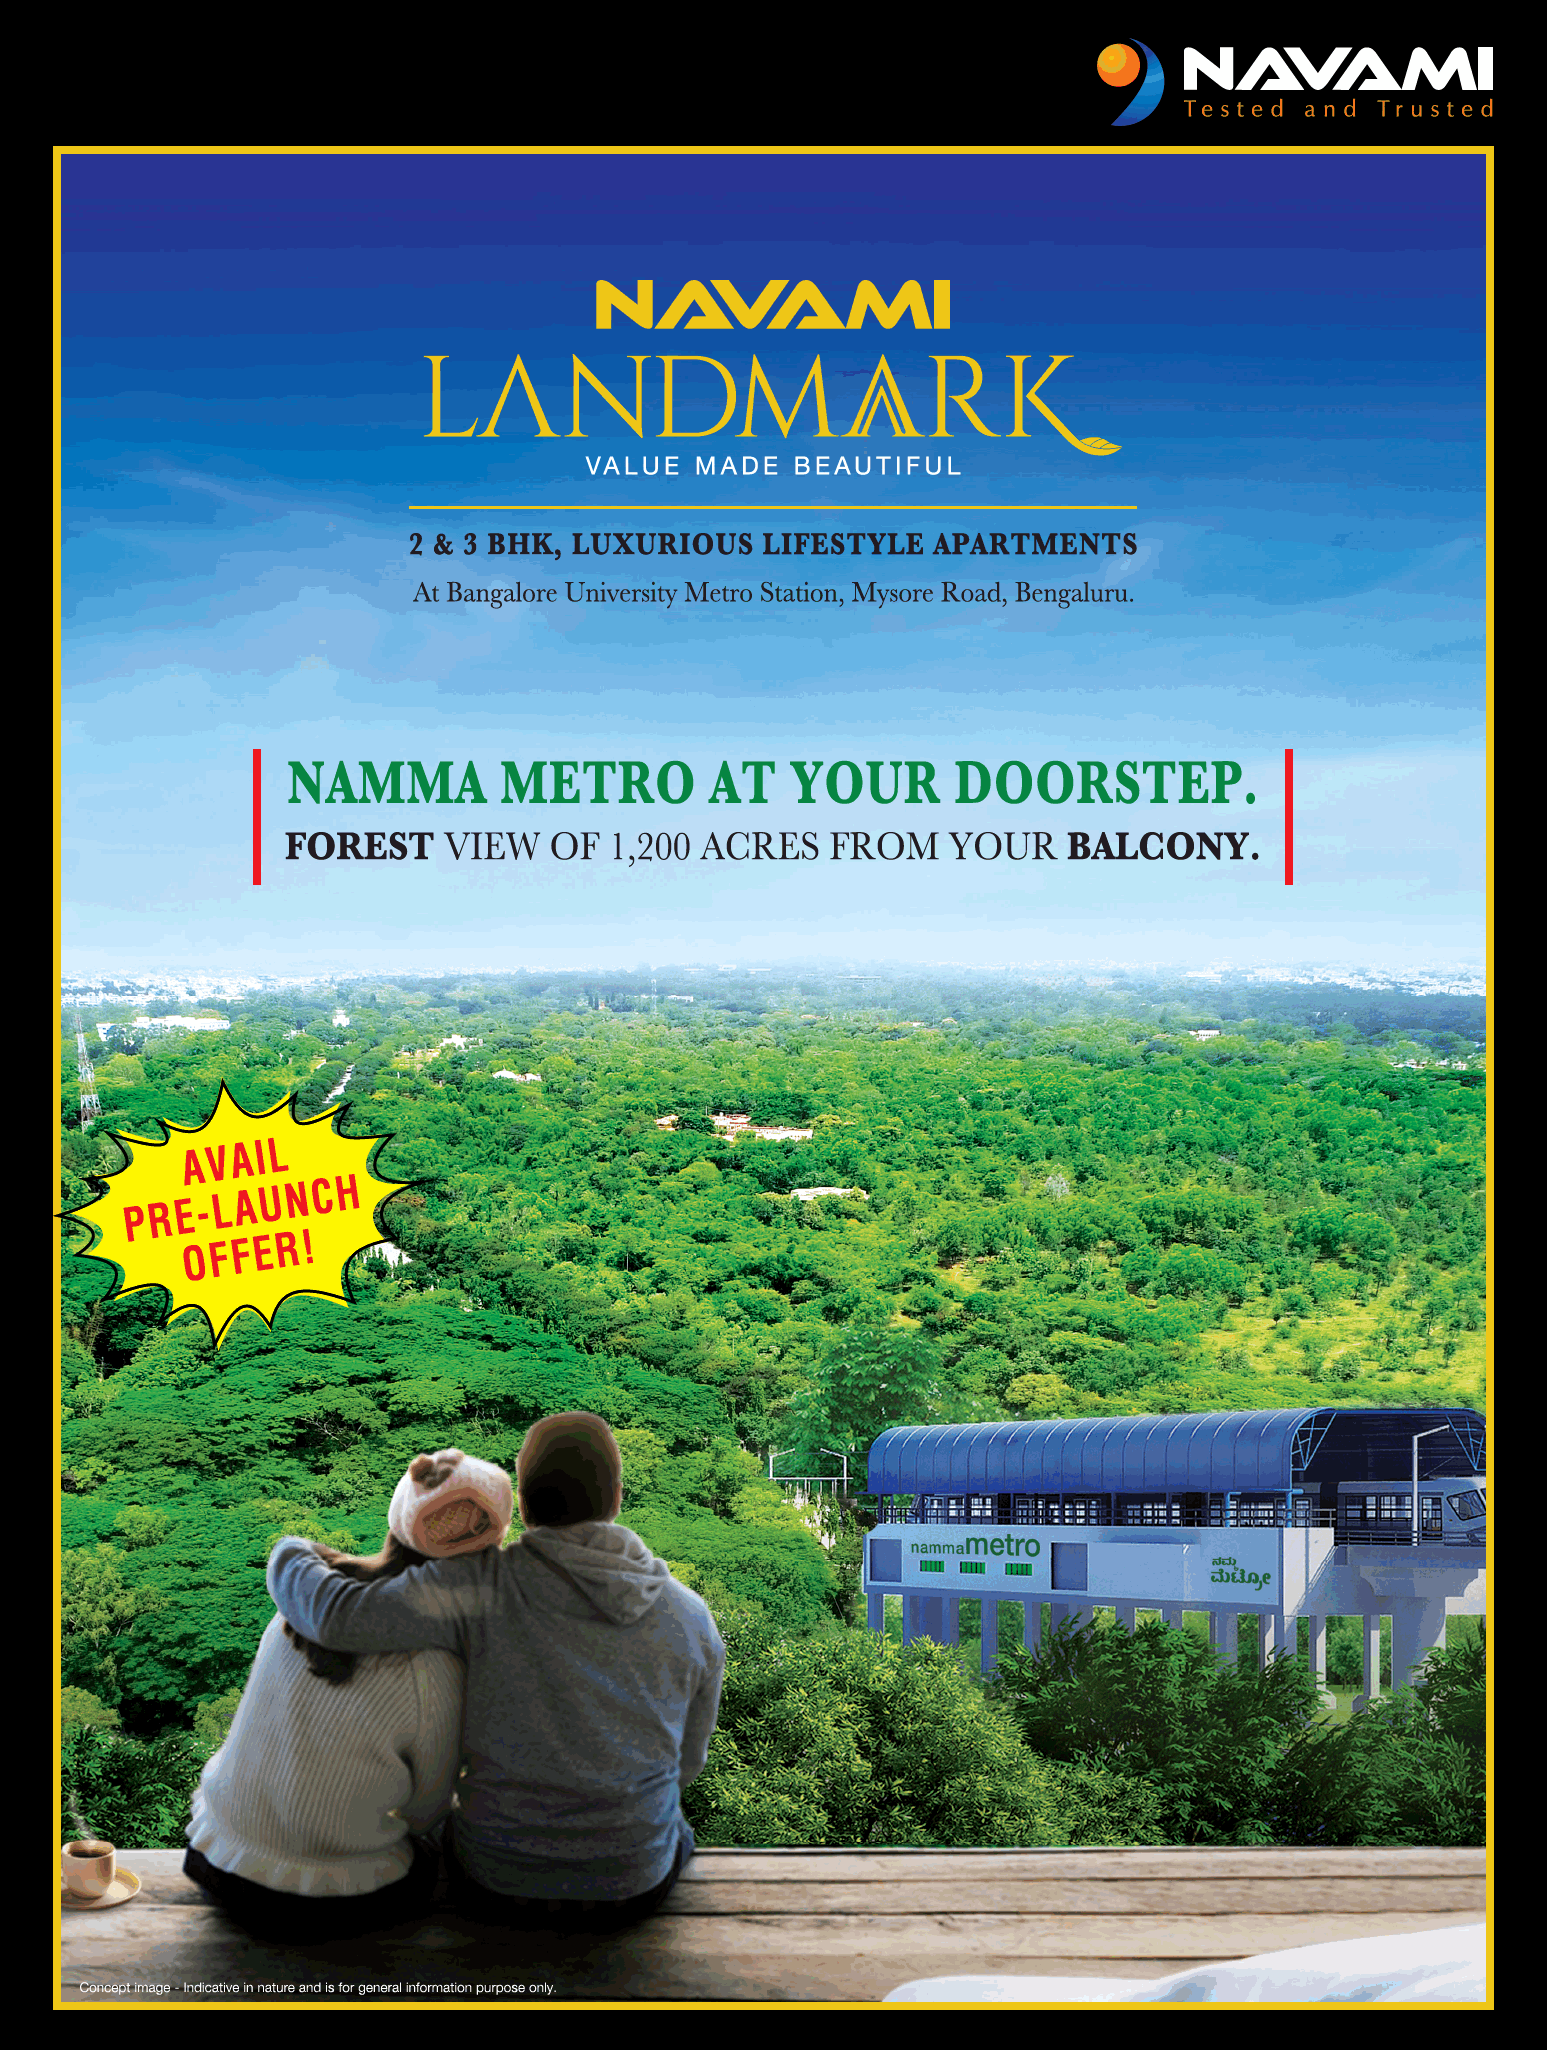 Avail 2 & 3 bhk luxurious lifestyle apartments at Navami Land Mark in Bangalore Update